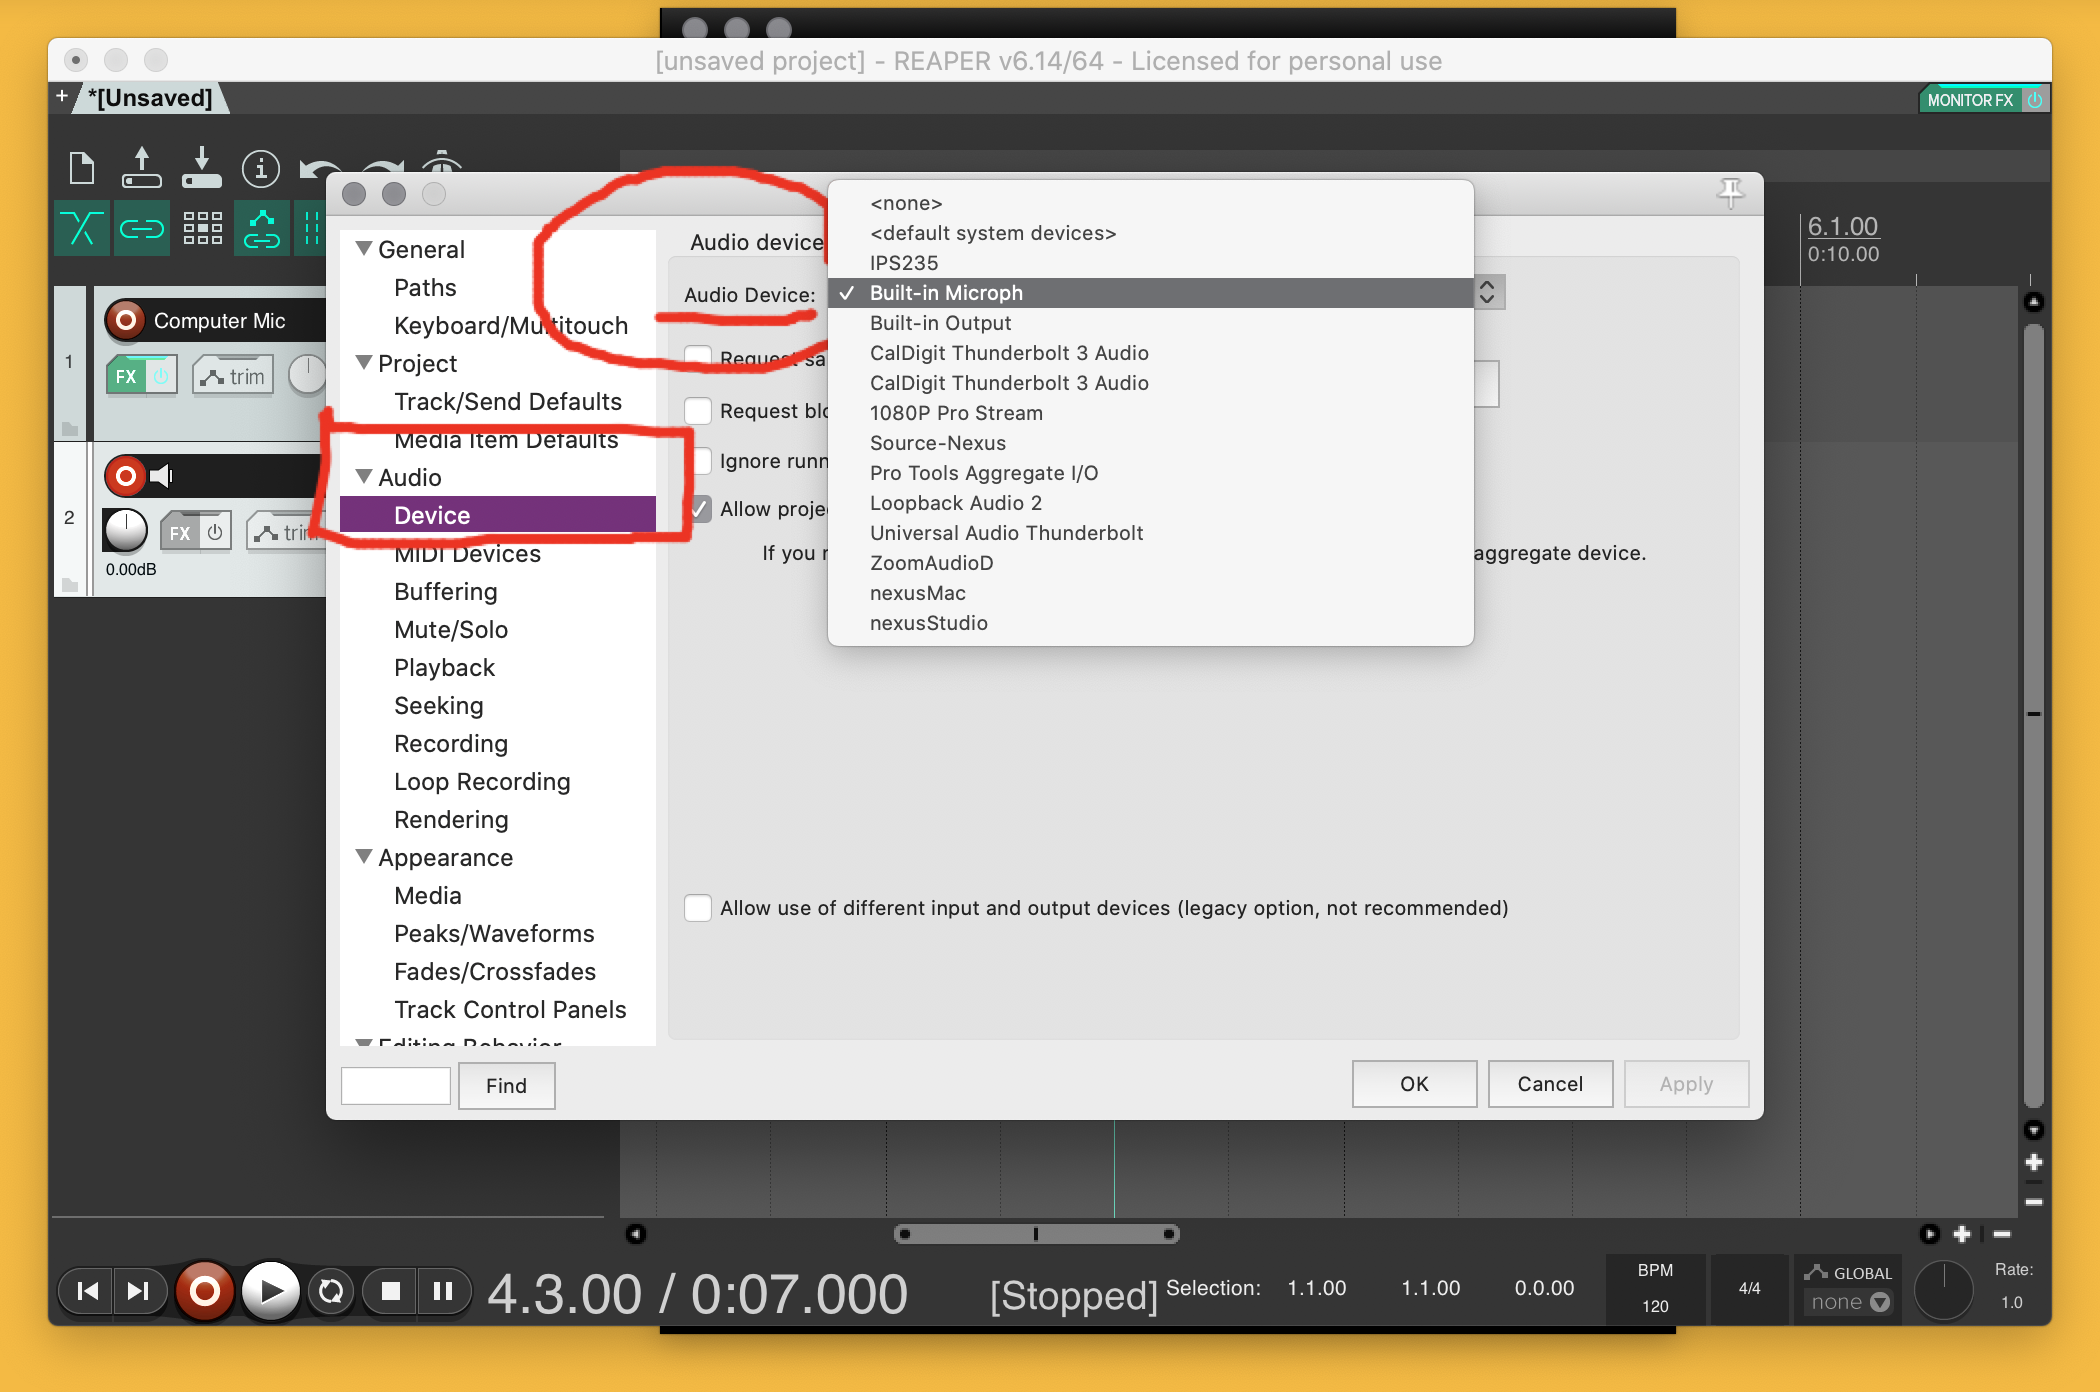 Image demonstrates audio device selection drop-down in Reaper